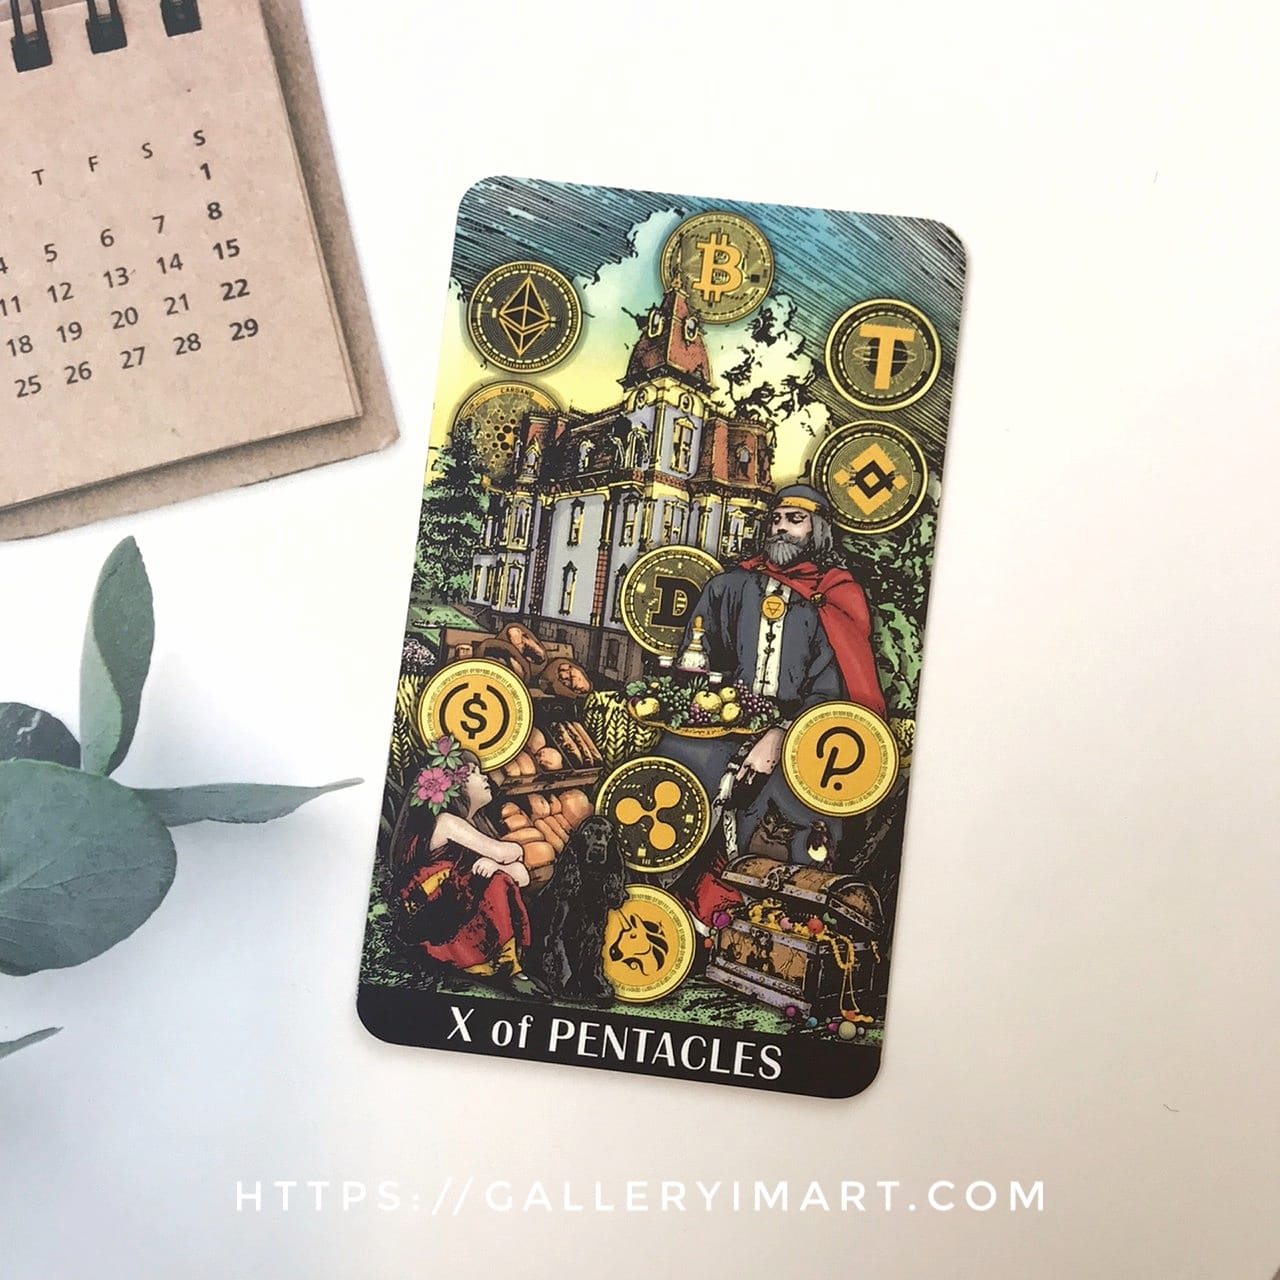 Ten of Pentacles Meaning